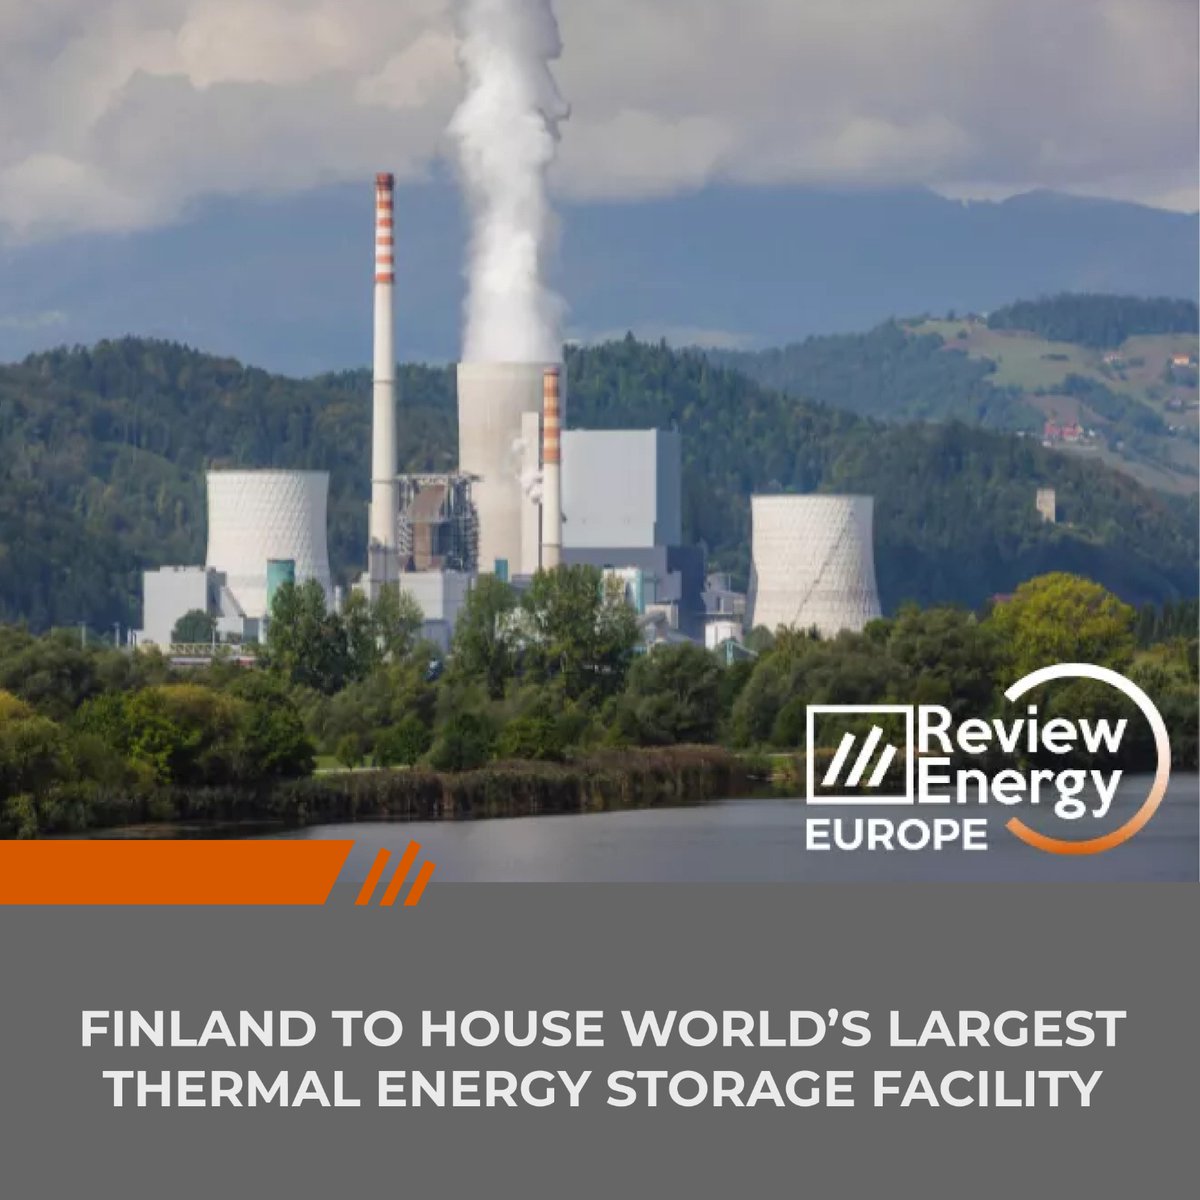 📢 Vantaa Energy plans to construct a 90 GWh #thermal energy storage facility in underground caverns in Vantaa 🇫🇮 which enables cost-effective storage or #renewable energy and waste heat on an industrial scale 🏭. ➡️ t.ly/8SgXY